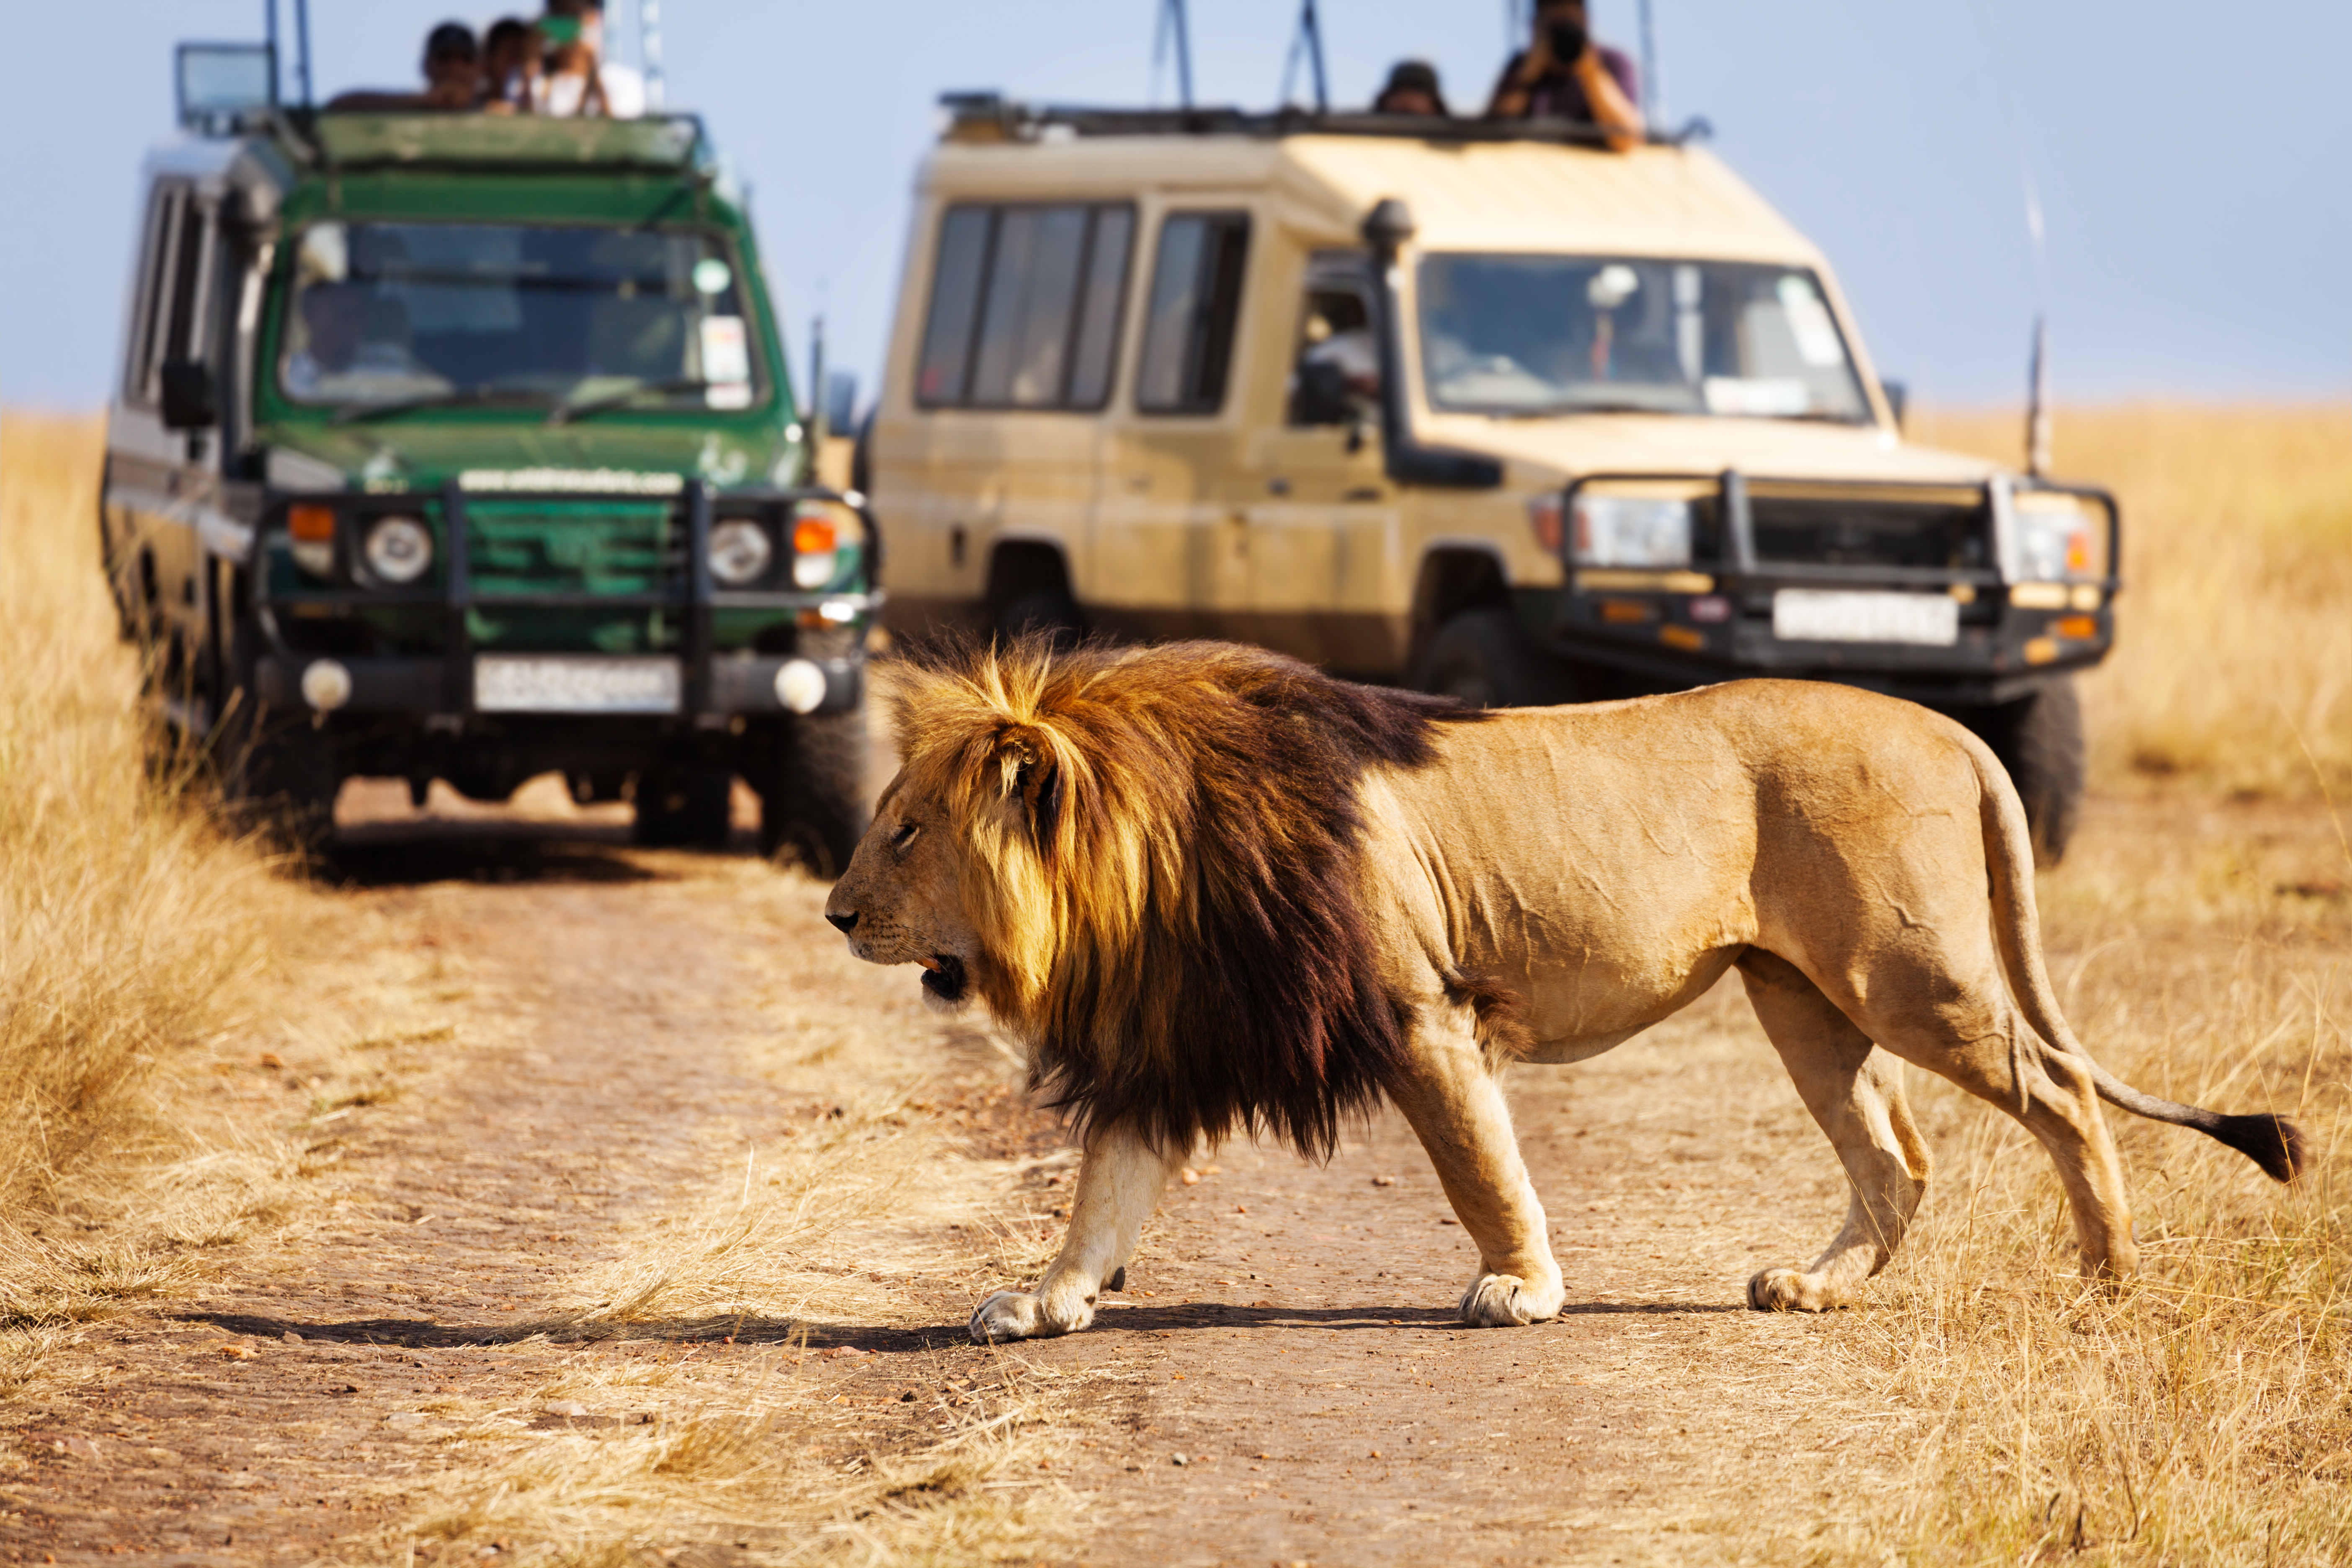 10 Day Amazing Safari During Your Family Vacation in Kenya - Lion Crossing in Front of Vehicle in Masai Mara National Reserve